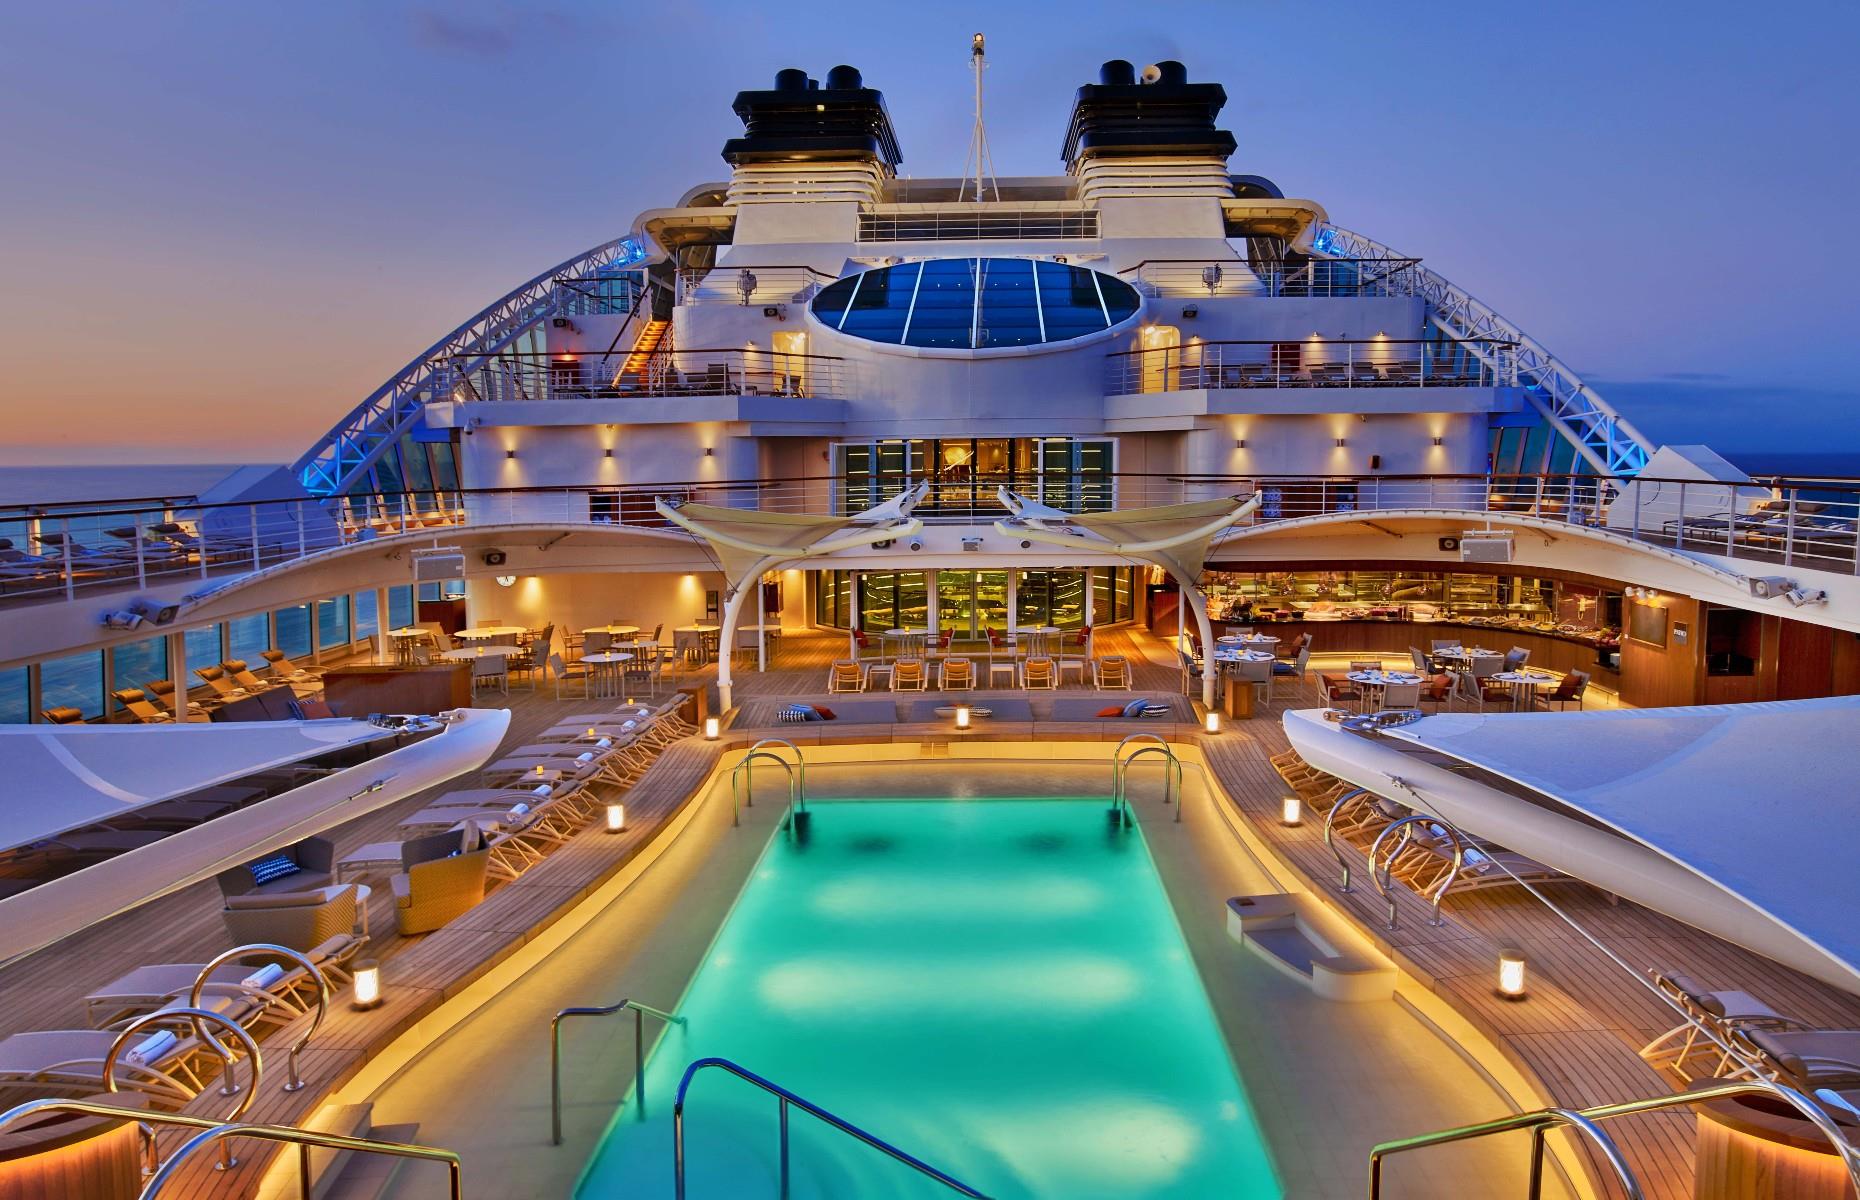 <p><a href="https://www.seabourn.com/en_US/cruise-ships/seabourn-encore/1.html">Seabourn Encore</a> is the newest striking ship in the cruise line's ultra-luxury fleet. Modeled on the trio of ships introduced with Seabourn Odyssey, Seabourn Encore represents another stage in the evolution of small ship cruising. There are 300 suites in total, including 16 penthouse suites and five penthouse spa suites, all with verandas facing the ocean.</p>